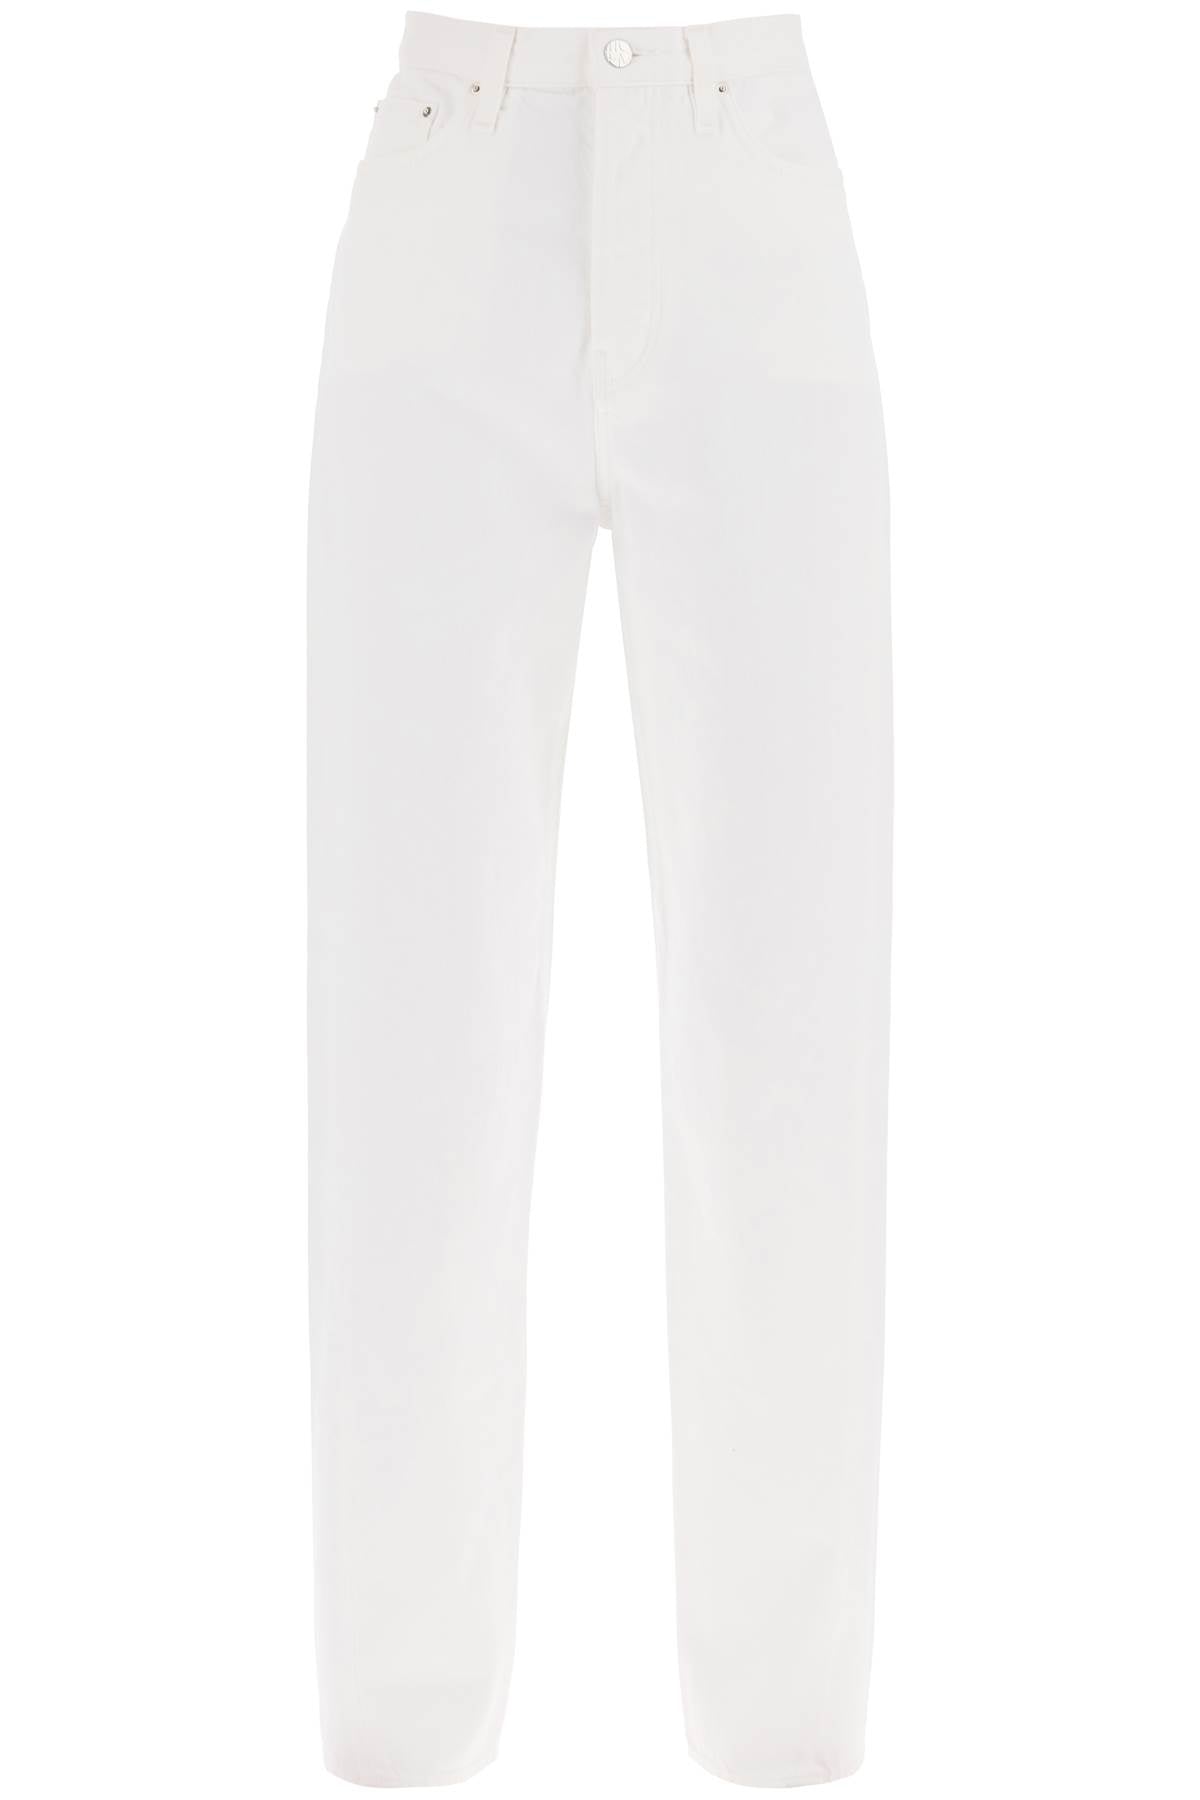 Toteme twisted seam straight jeans 231 240 748 32 OFF WHITE